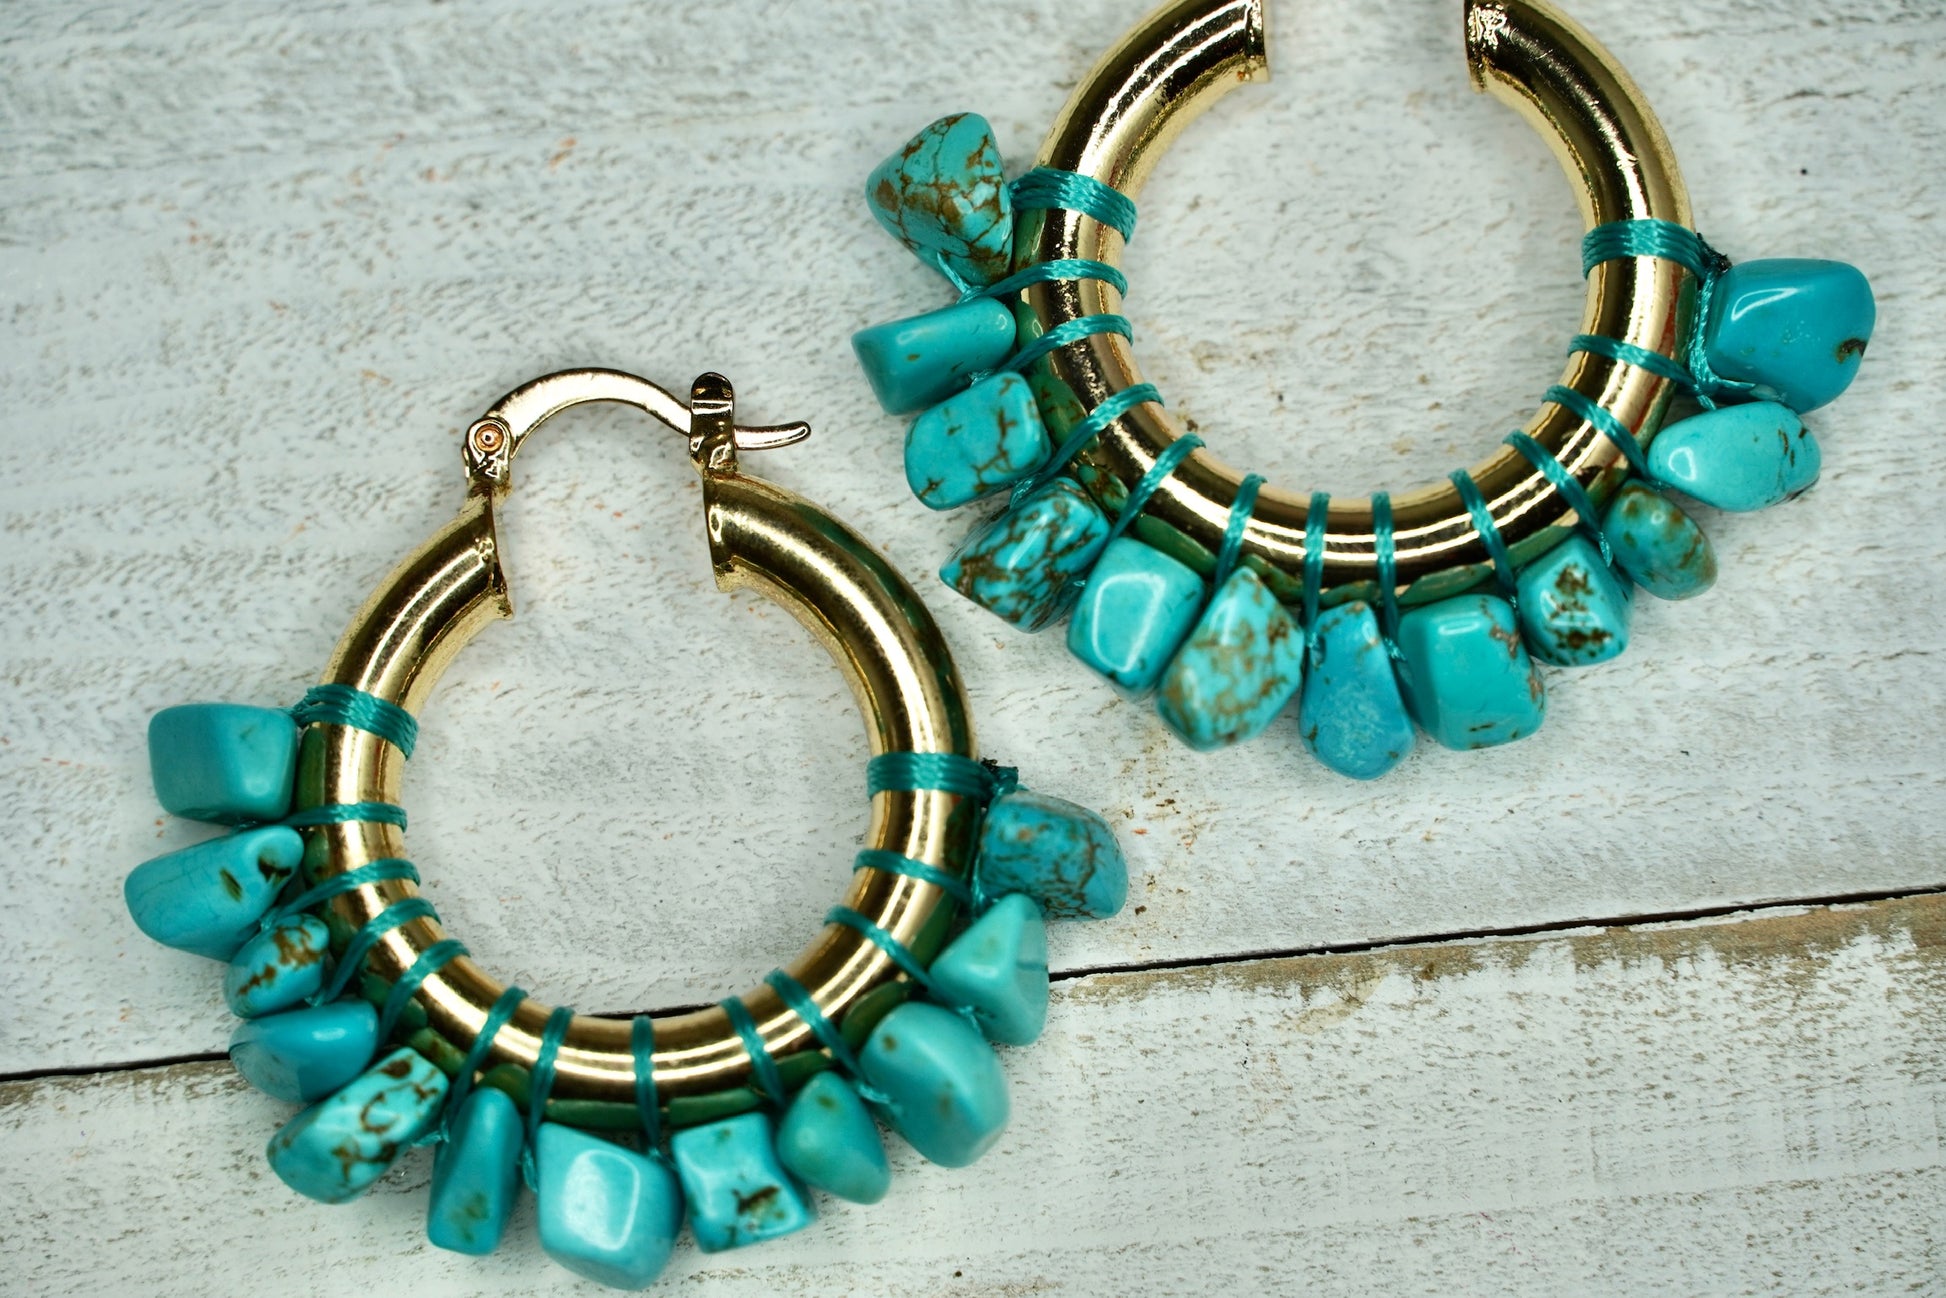 Gold Hoops with nice Turquoise Stone Embellishment